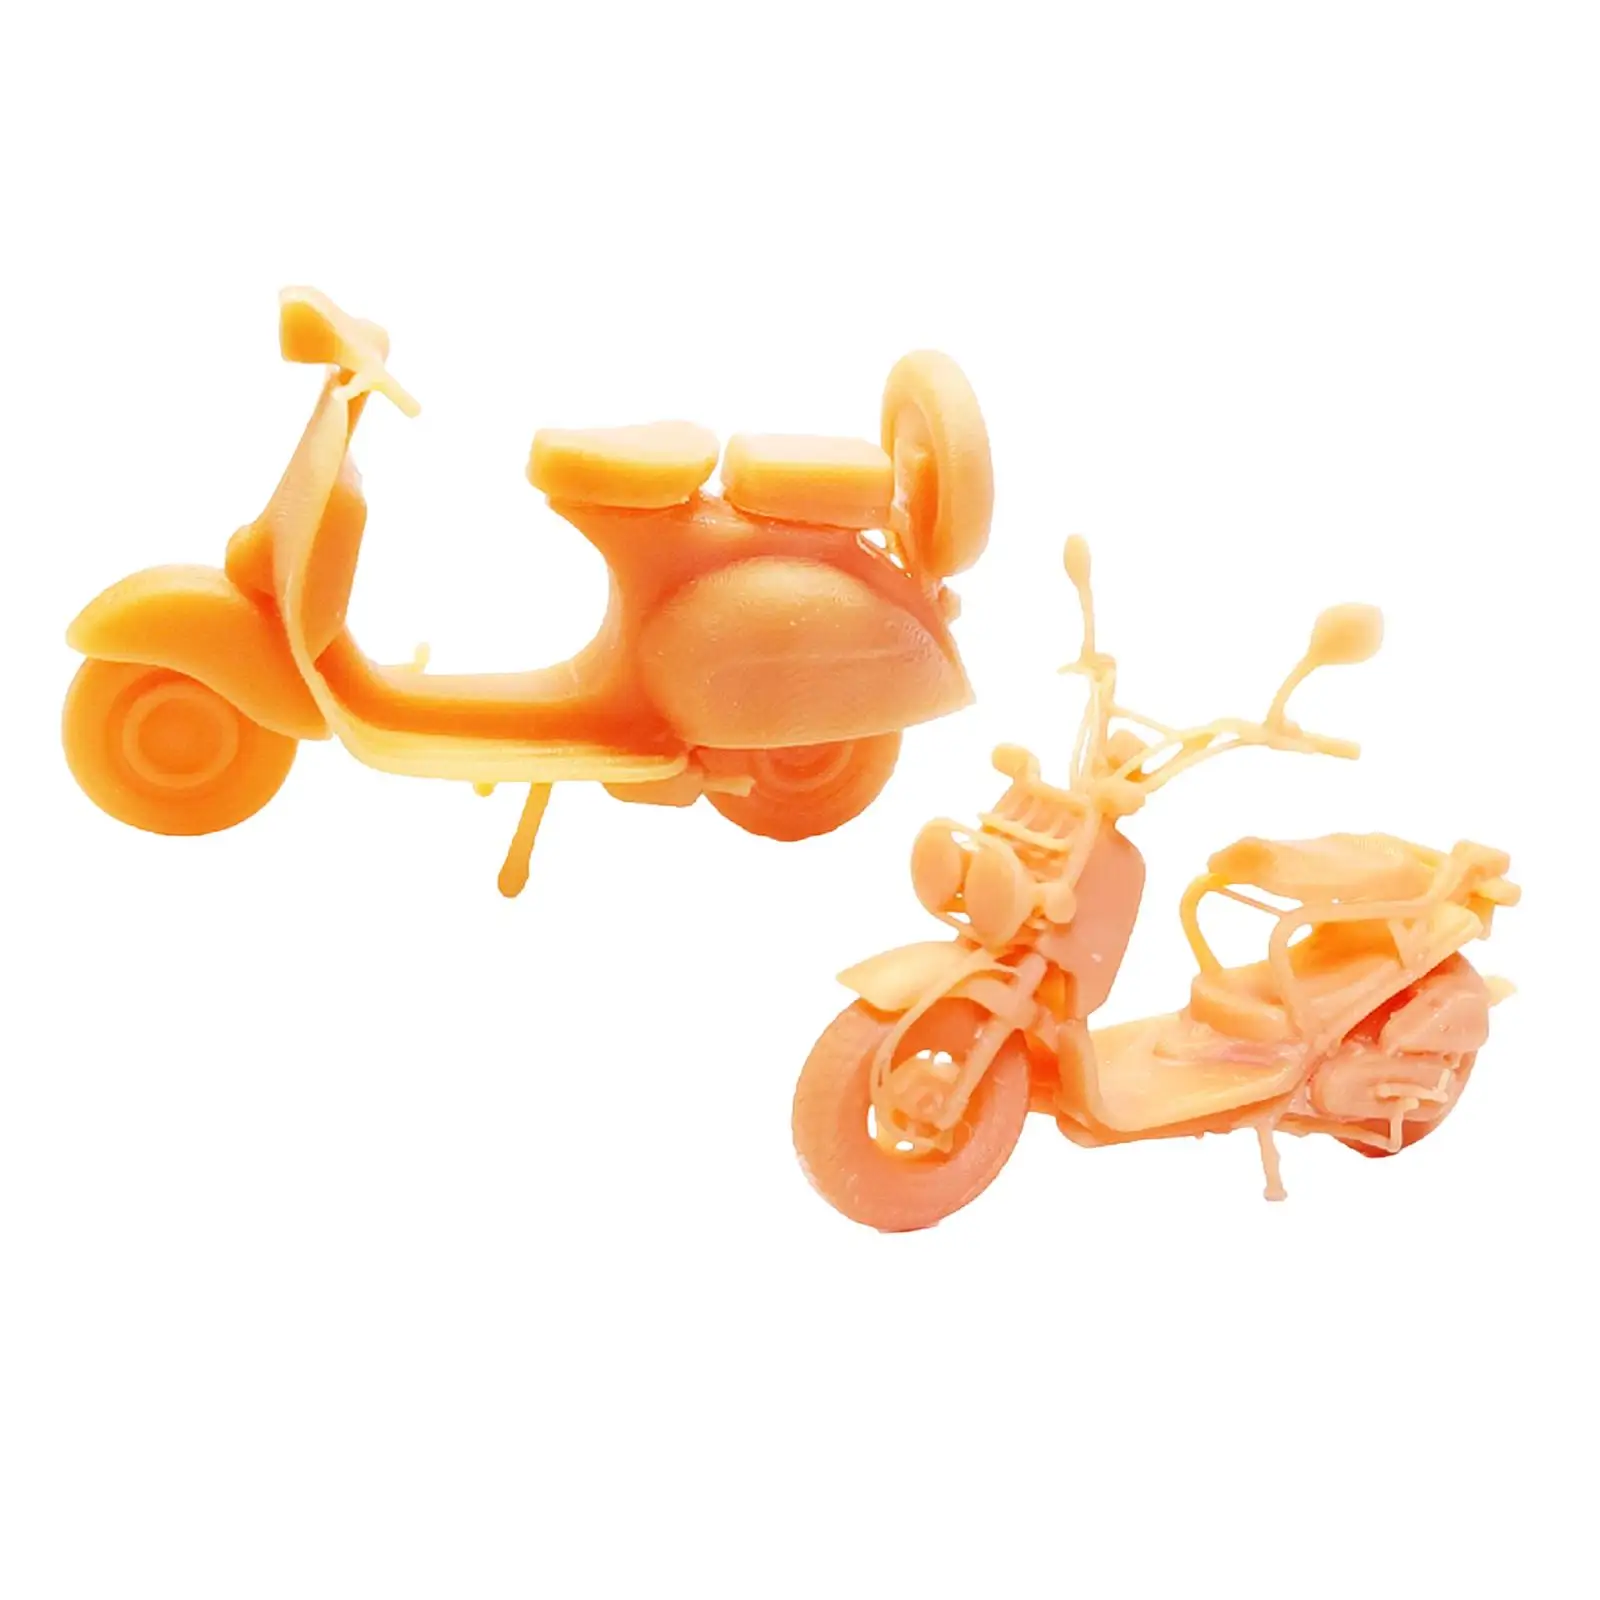 1/64 Miniature Motorcycle Model Diorama Motorcycle Toys for Dollhouse Photography Props Diorama Scenery Landscape Decoration